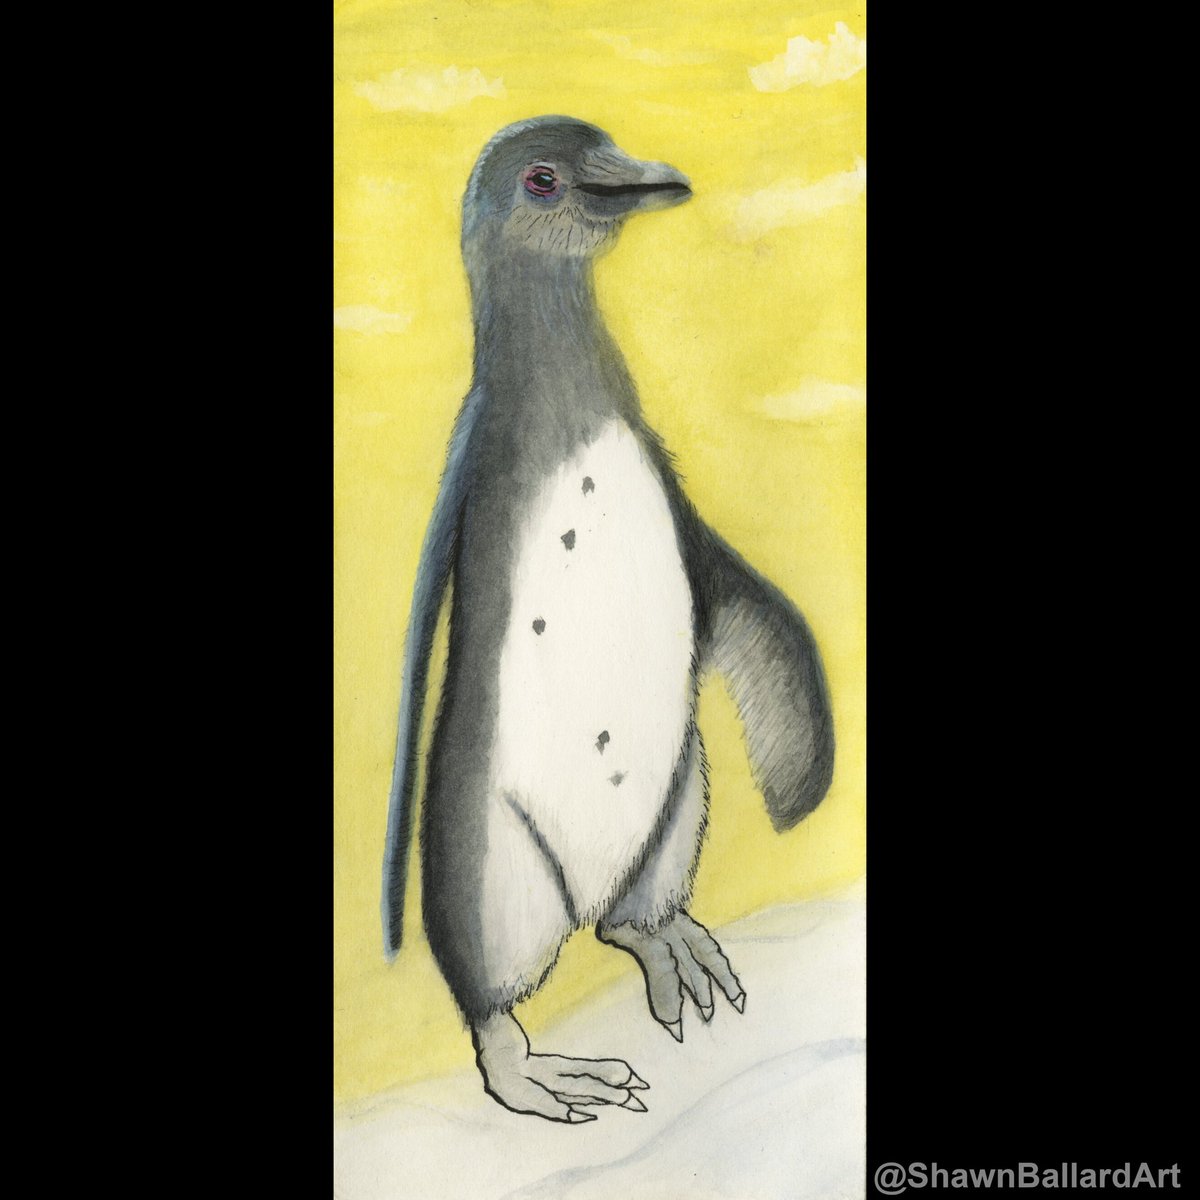 African Penguin
Watercolor & Ink 
Fact: The African penguin is monogamous, it breeds in colonies and pairs return to the same site each year. A clutch of two eggs are laid either in burrows in guano or nests in the sand under boulders or bushes.
#penguinart #penguinpainting